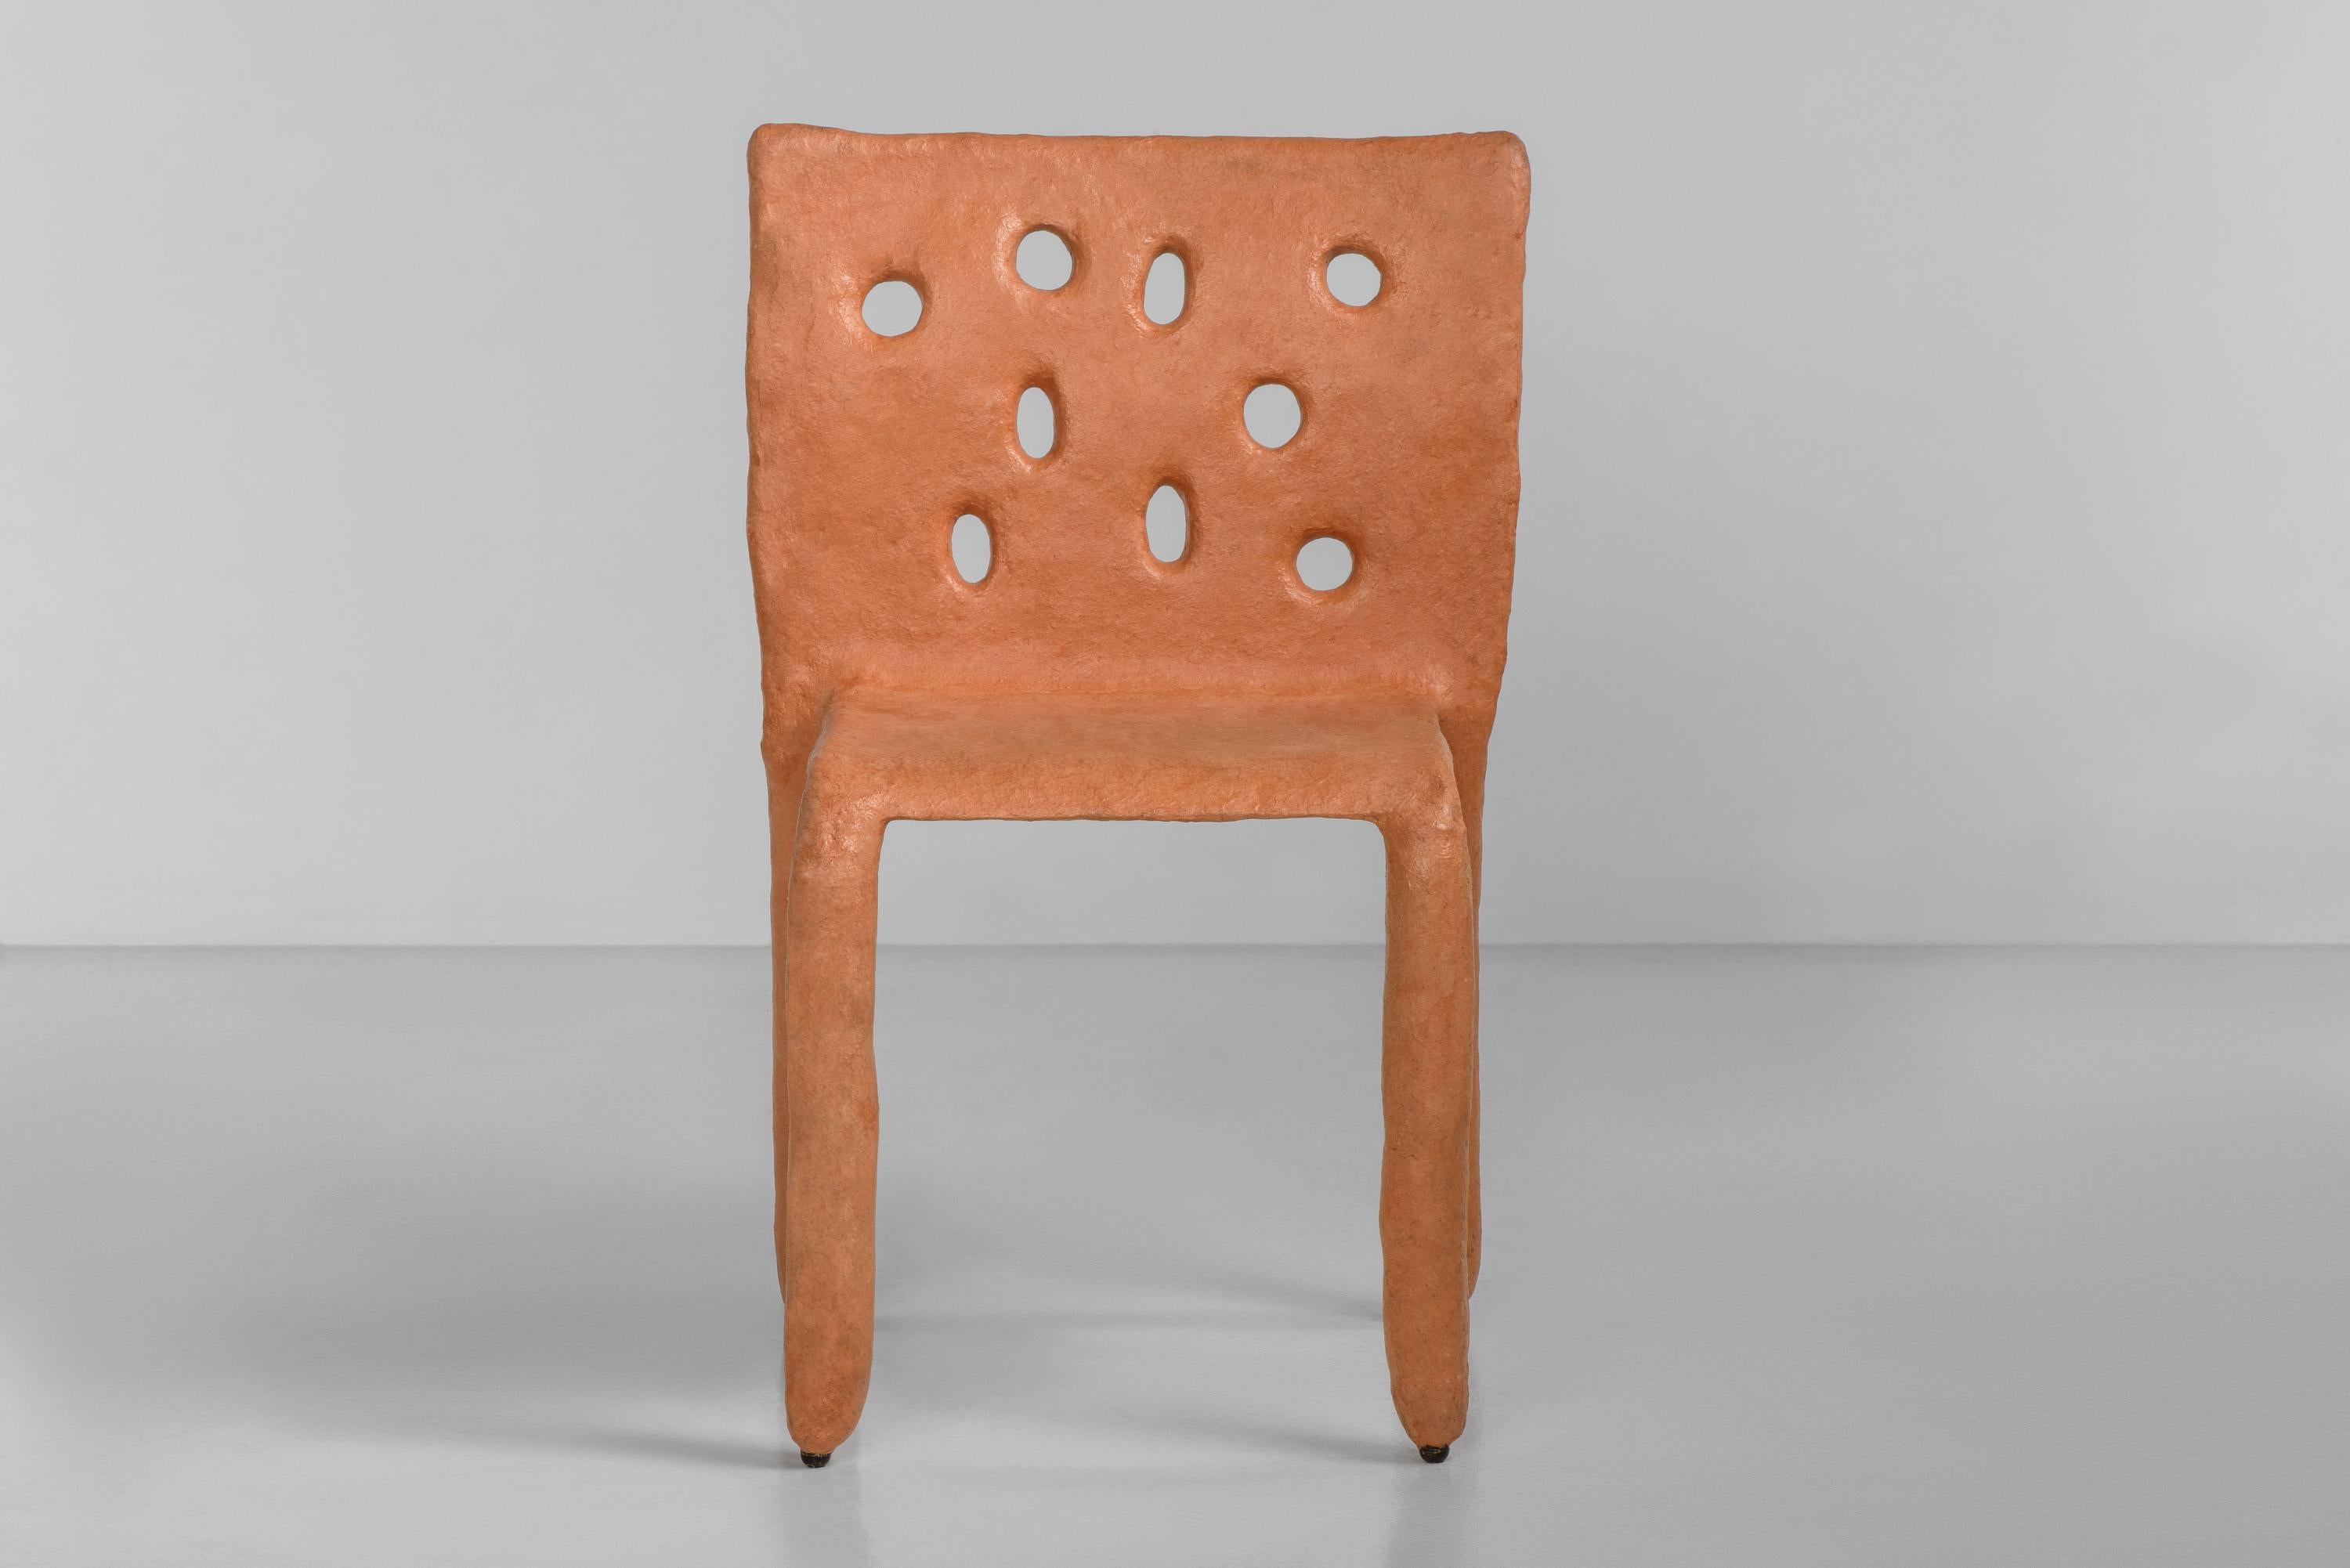 Sculpted outdoor Contemporary chair by FAINA
Design: Victoriya Yakusha
Material: steel, flax rubber, biopolymer, cellulose
Dimensions: height 82 x width 54 x legs depth 45 cm
 Weight: 15 kilos.

Indoor finish available, please contact